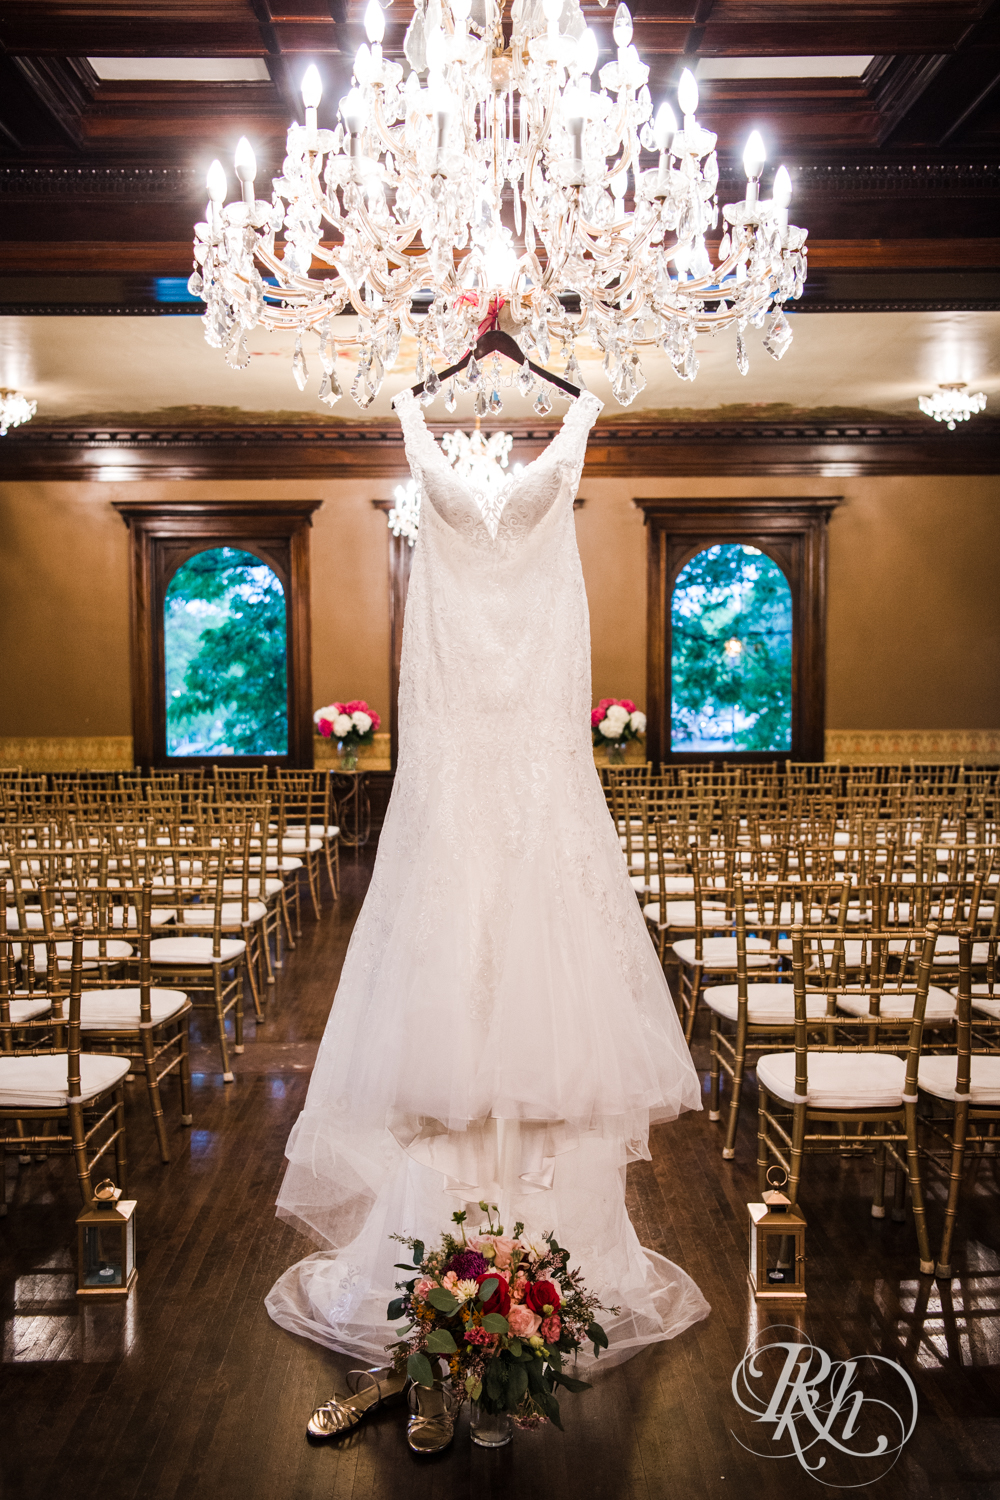 Dress hanging from chandelier at the Semple Mansion in Minneapolis, Minnesota.